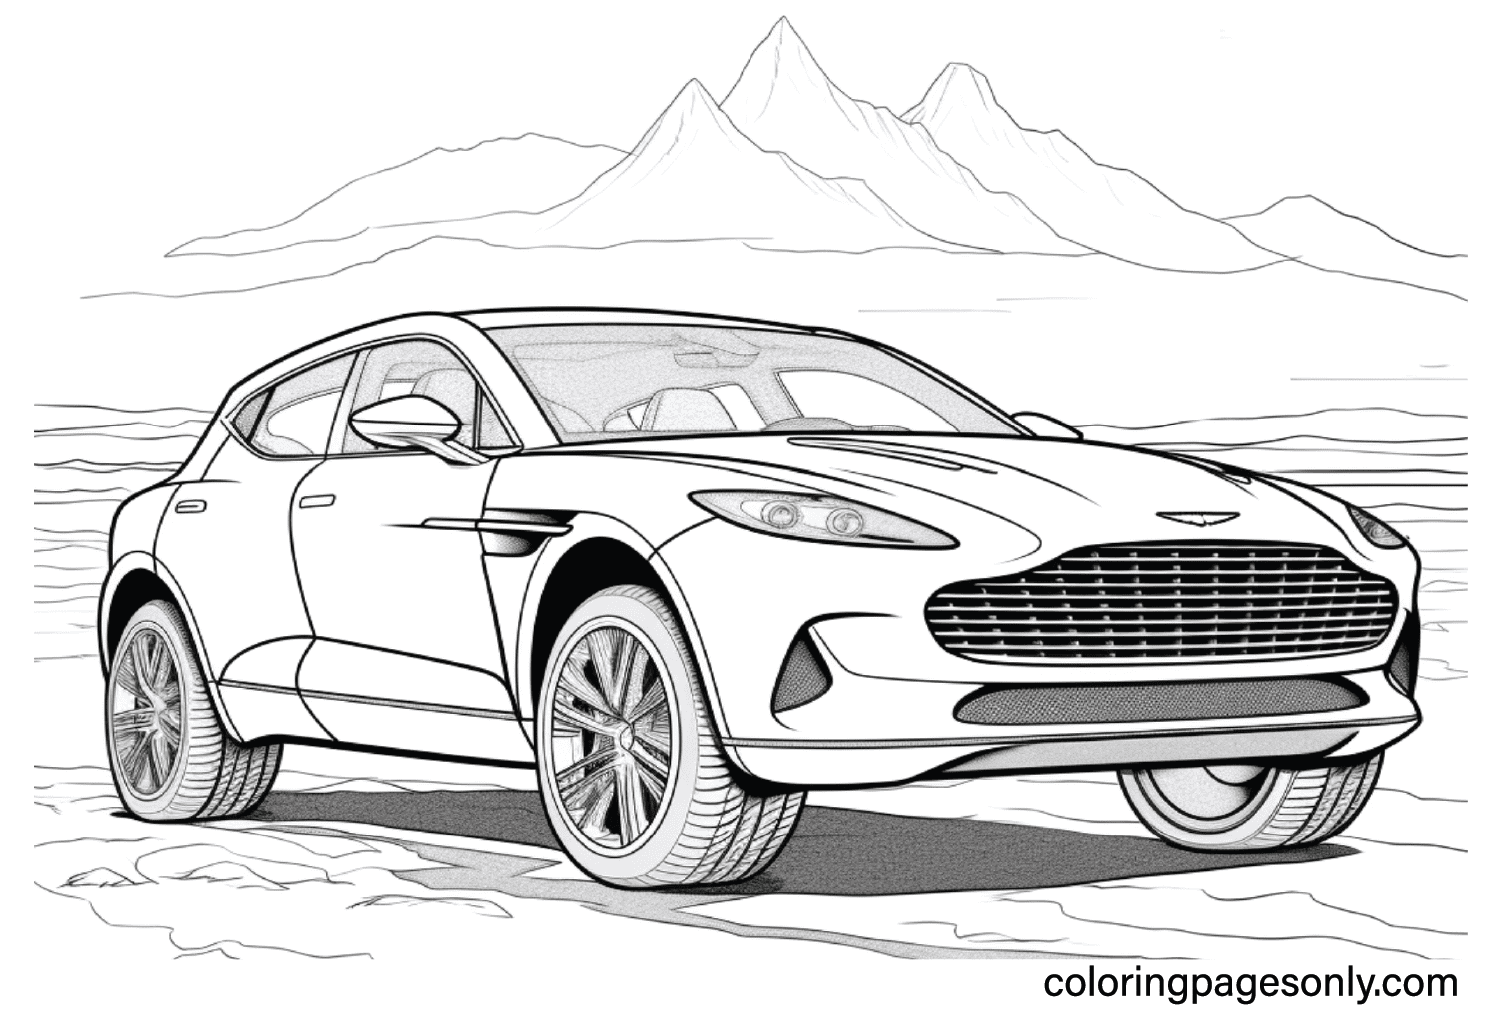 Aston Martin DBX Coloring Page from Aston Martin